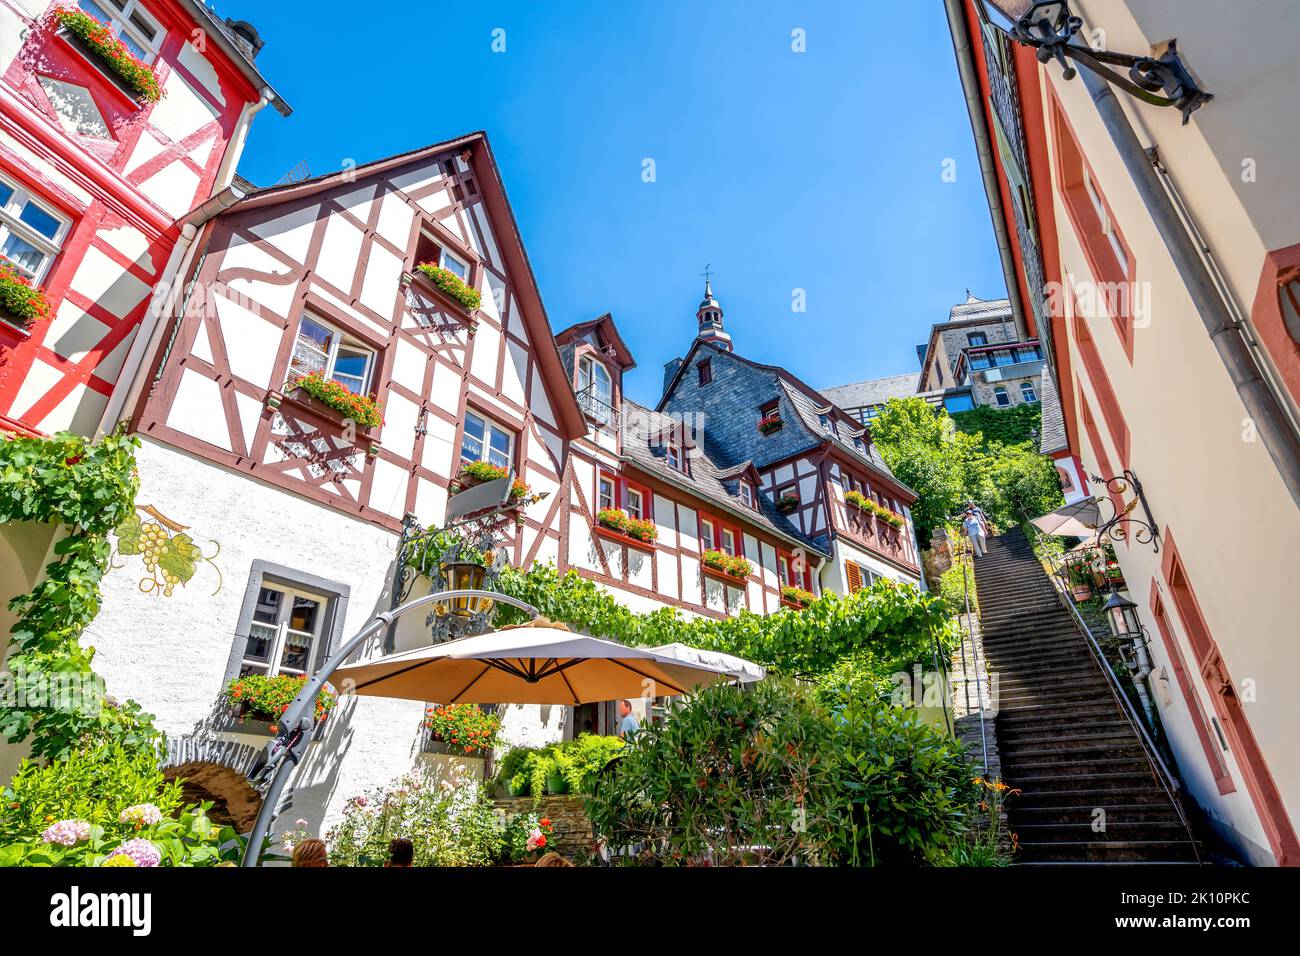 Historical city of Beilstein, Moselle, Germany Stock Photo